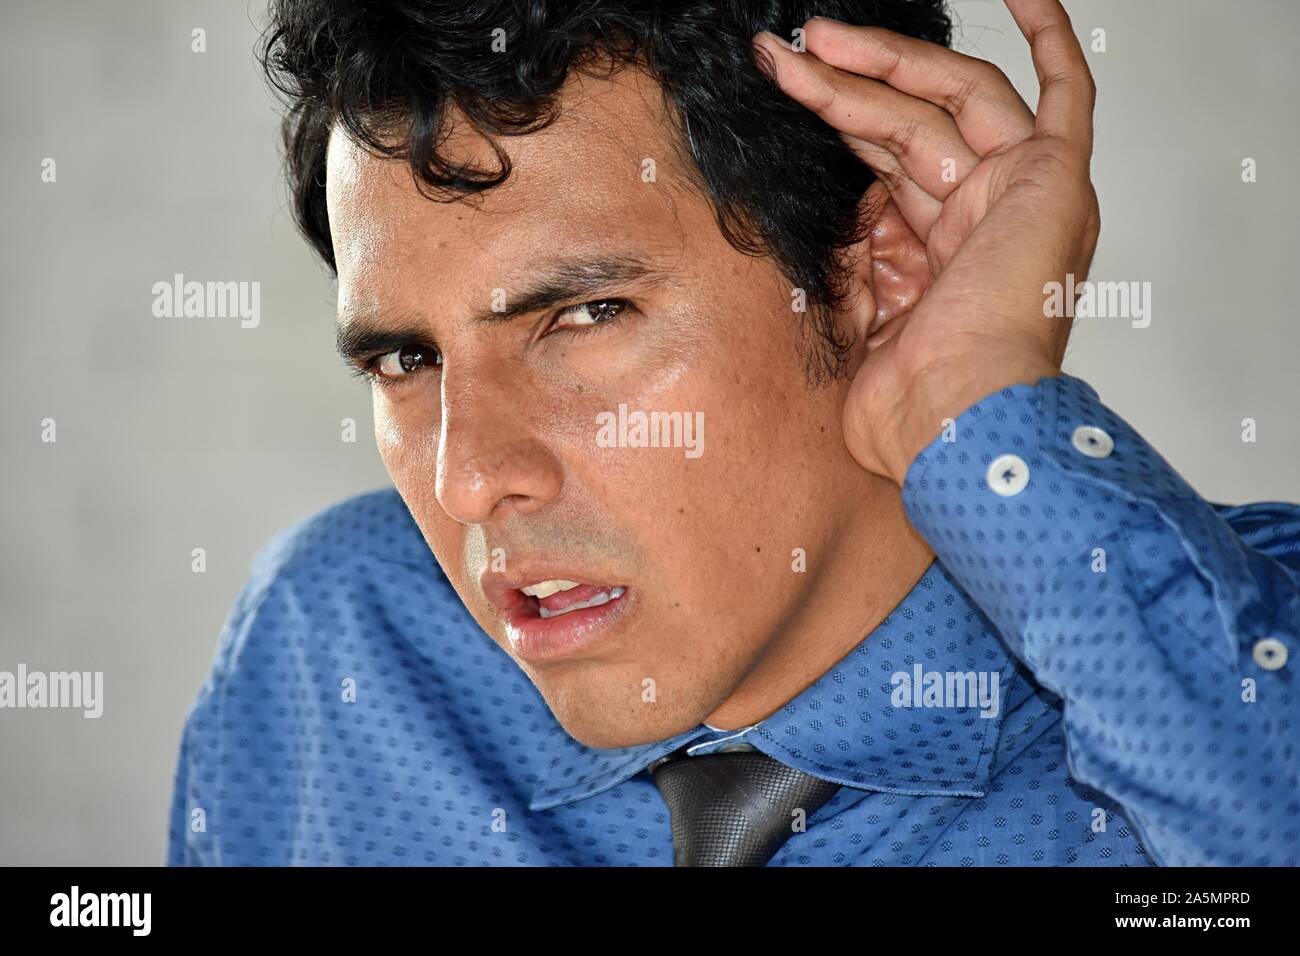 Handsome Business Man Hearing Wearing Tie Stock Photo